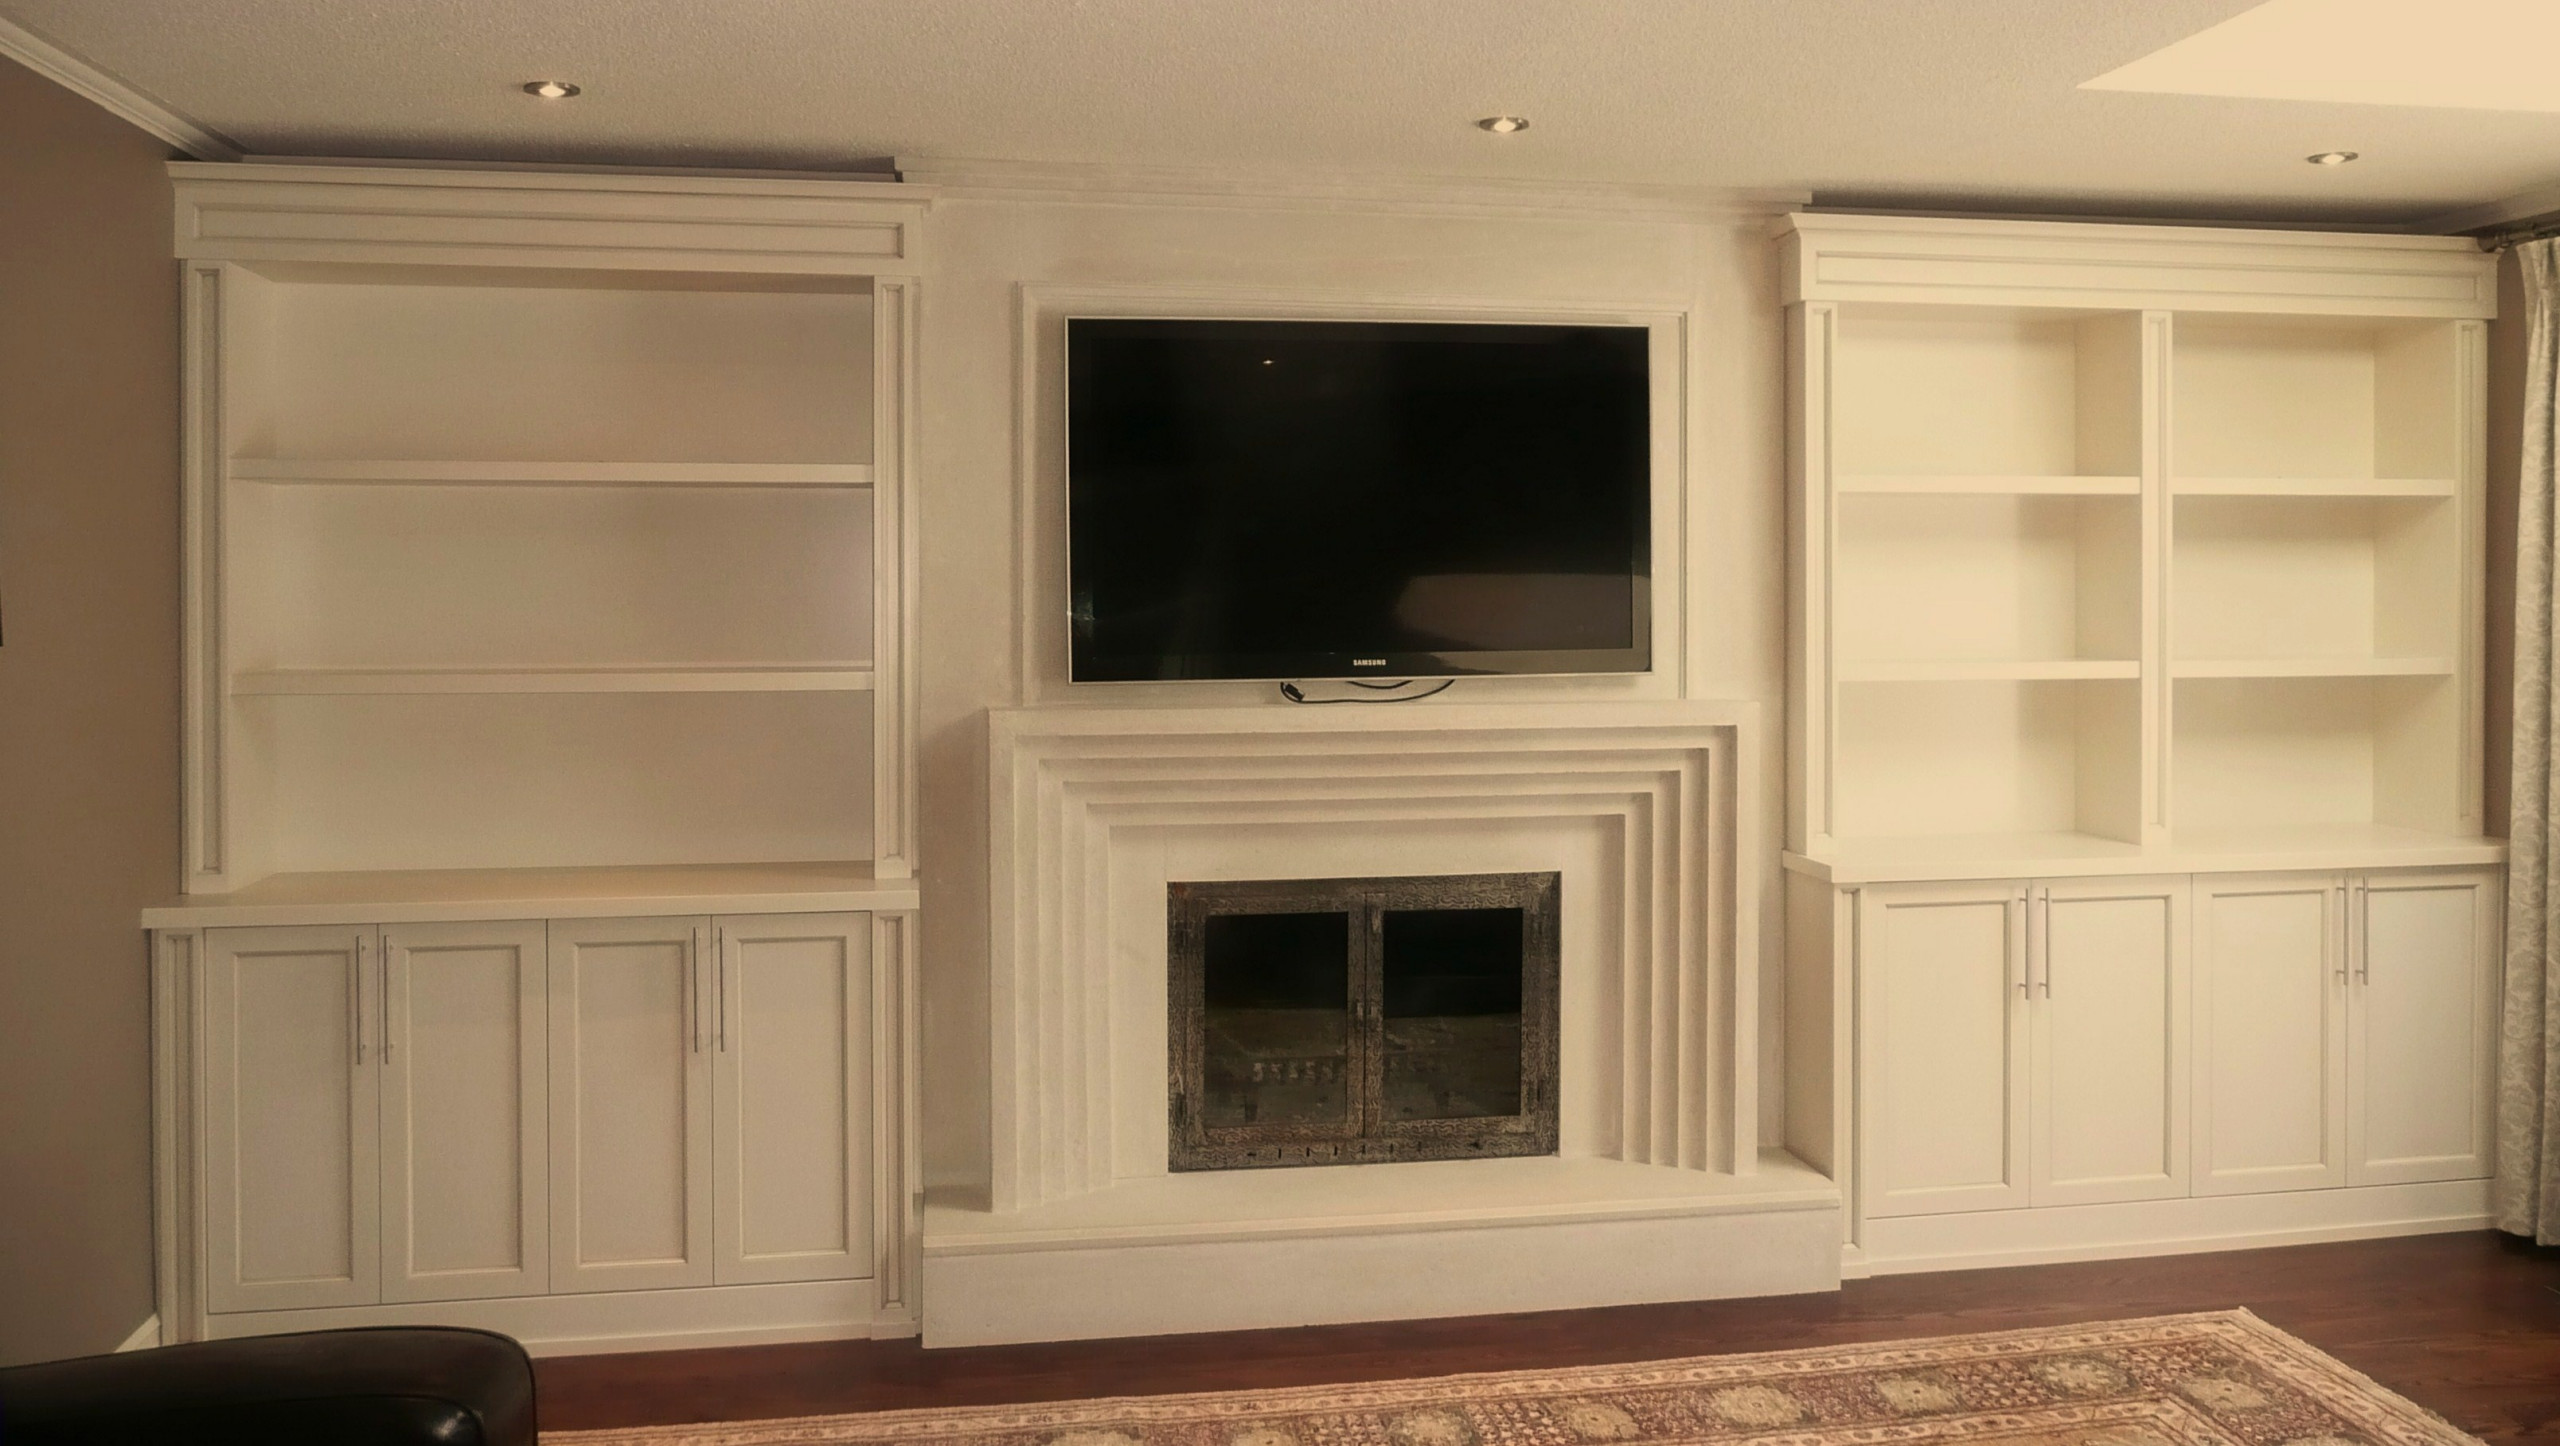 Built-in Units around Fireplace